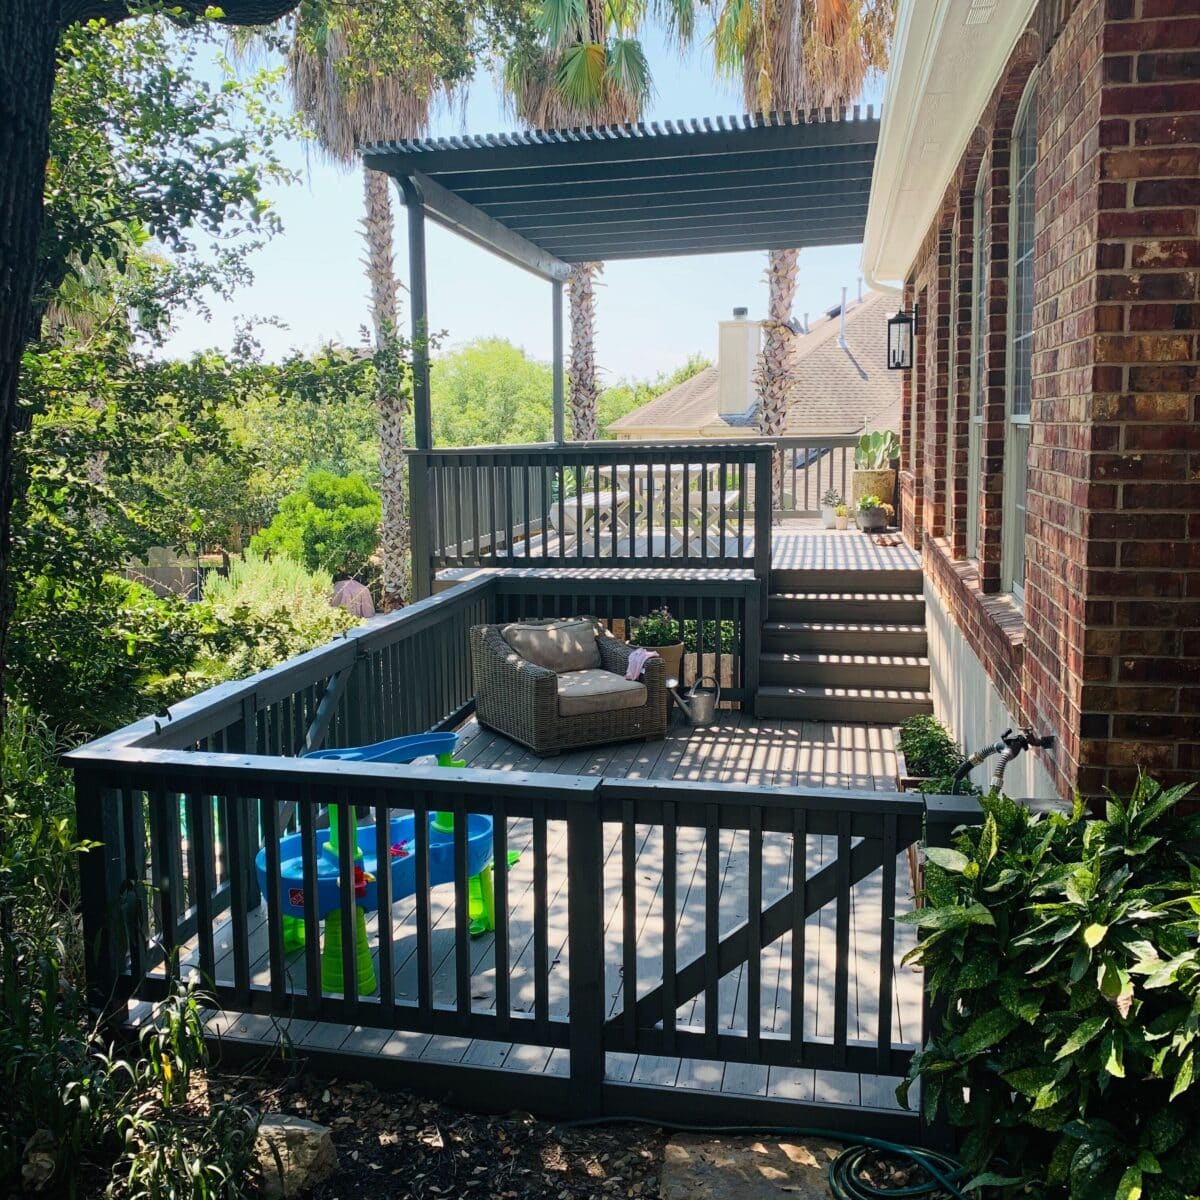 Side view of a two story pergola over wood deck with wood railings and wood gate to the background to keep children safe